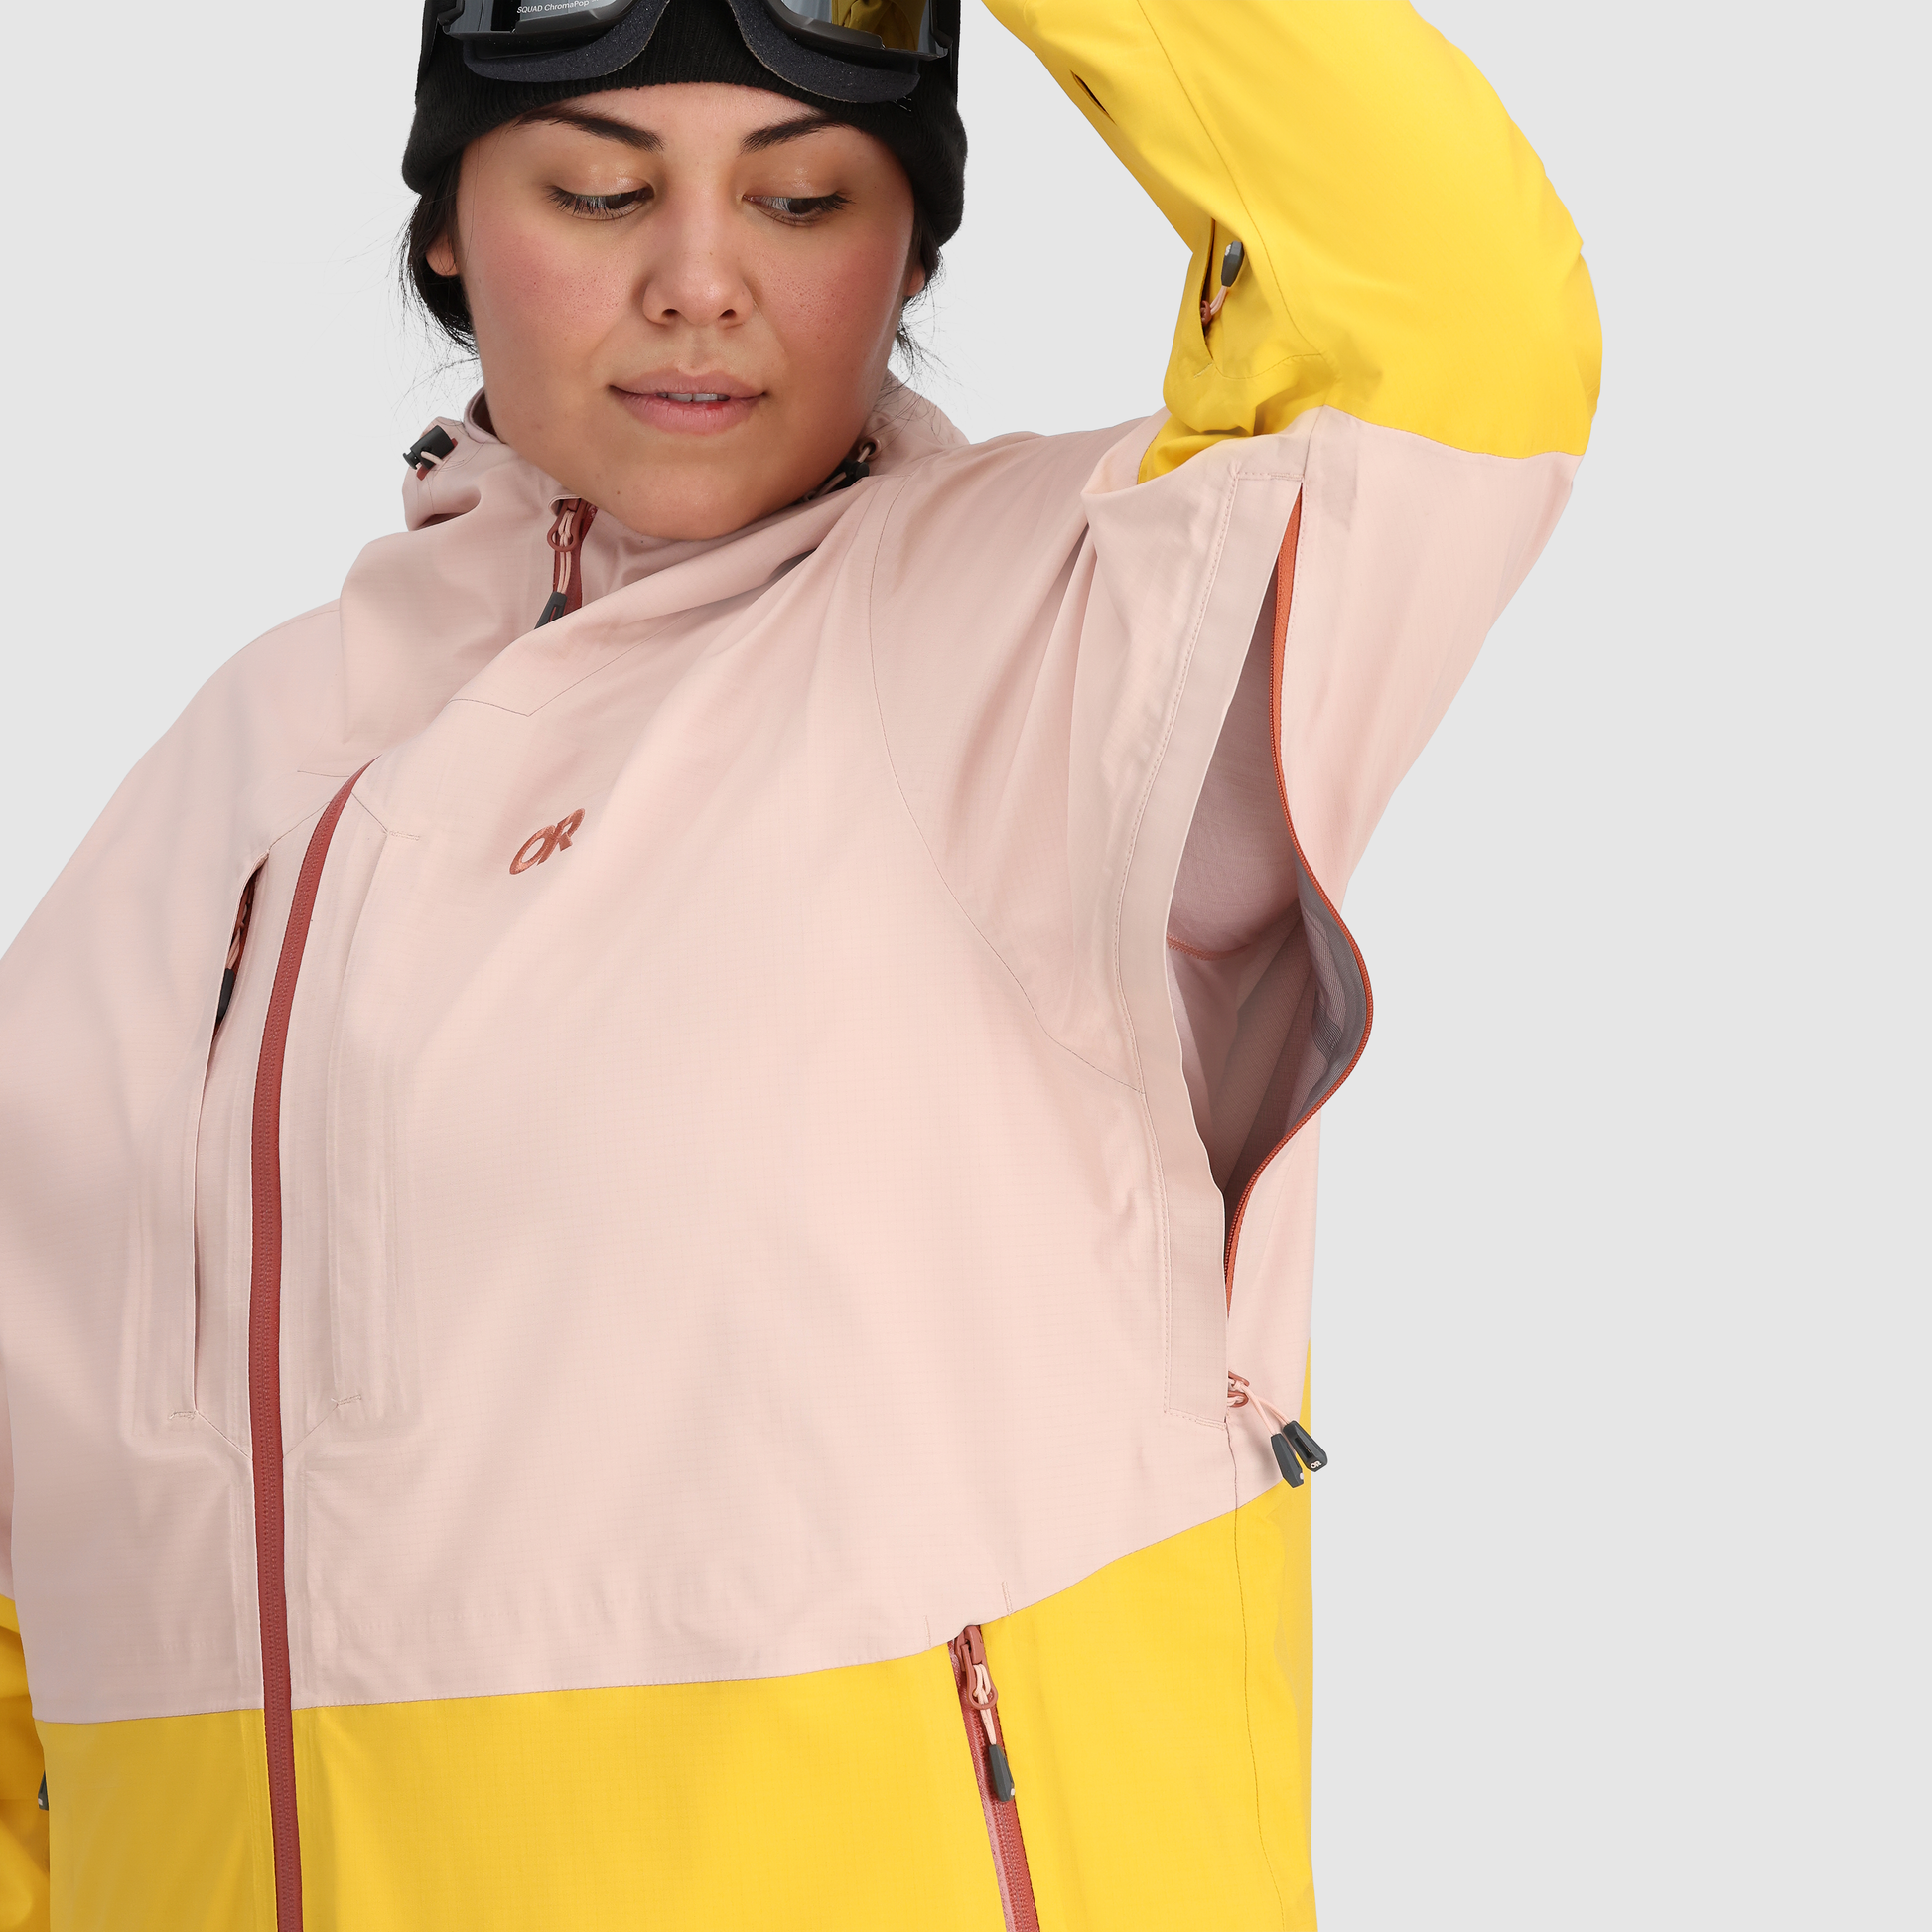 B6 :: Pit Zips / Easily vent out excess heat buildup without needing to remove your jacket completely.